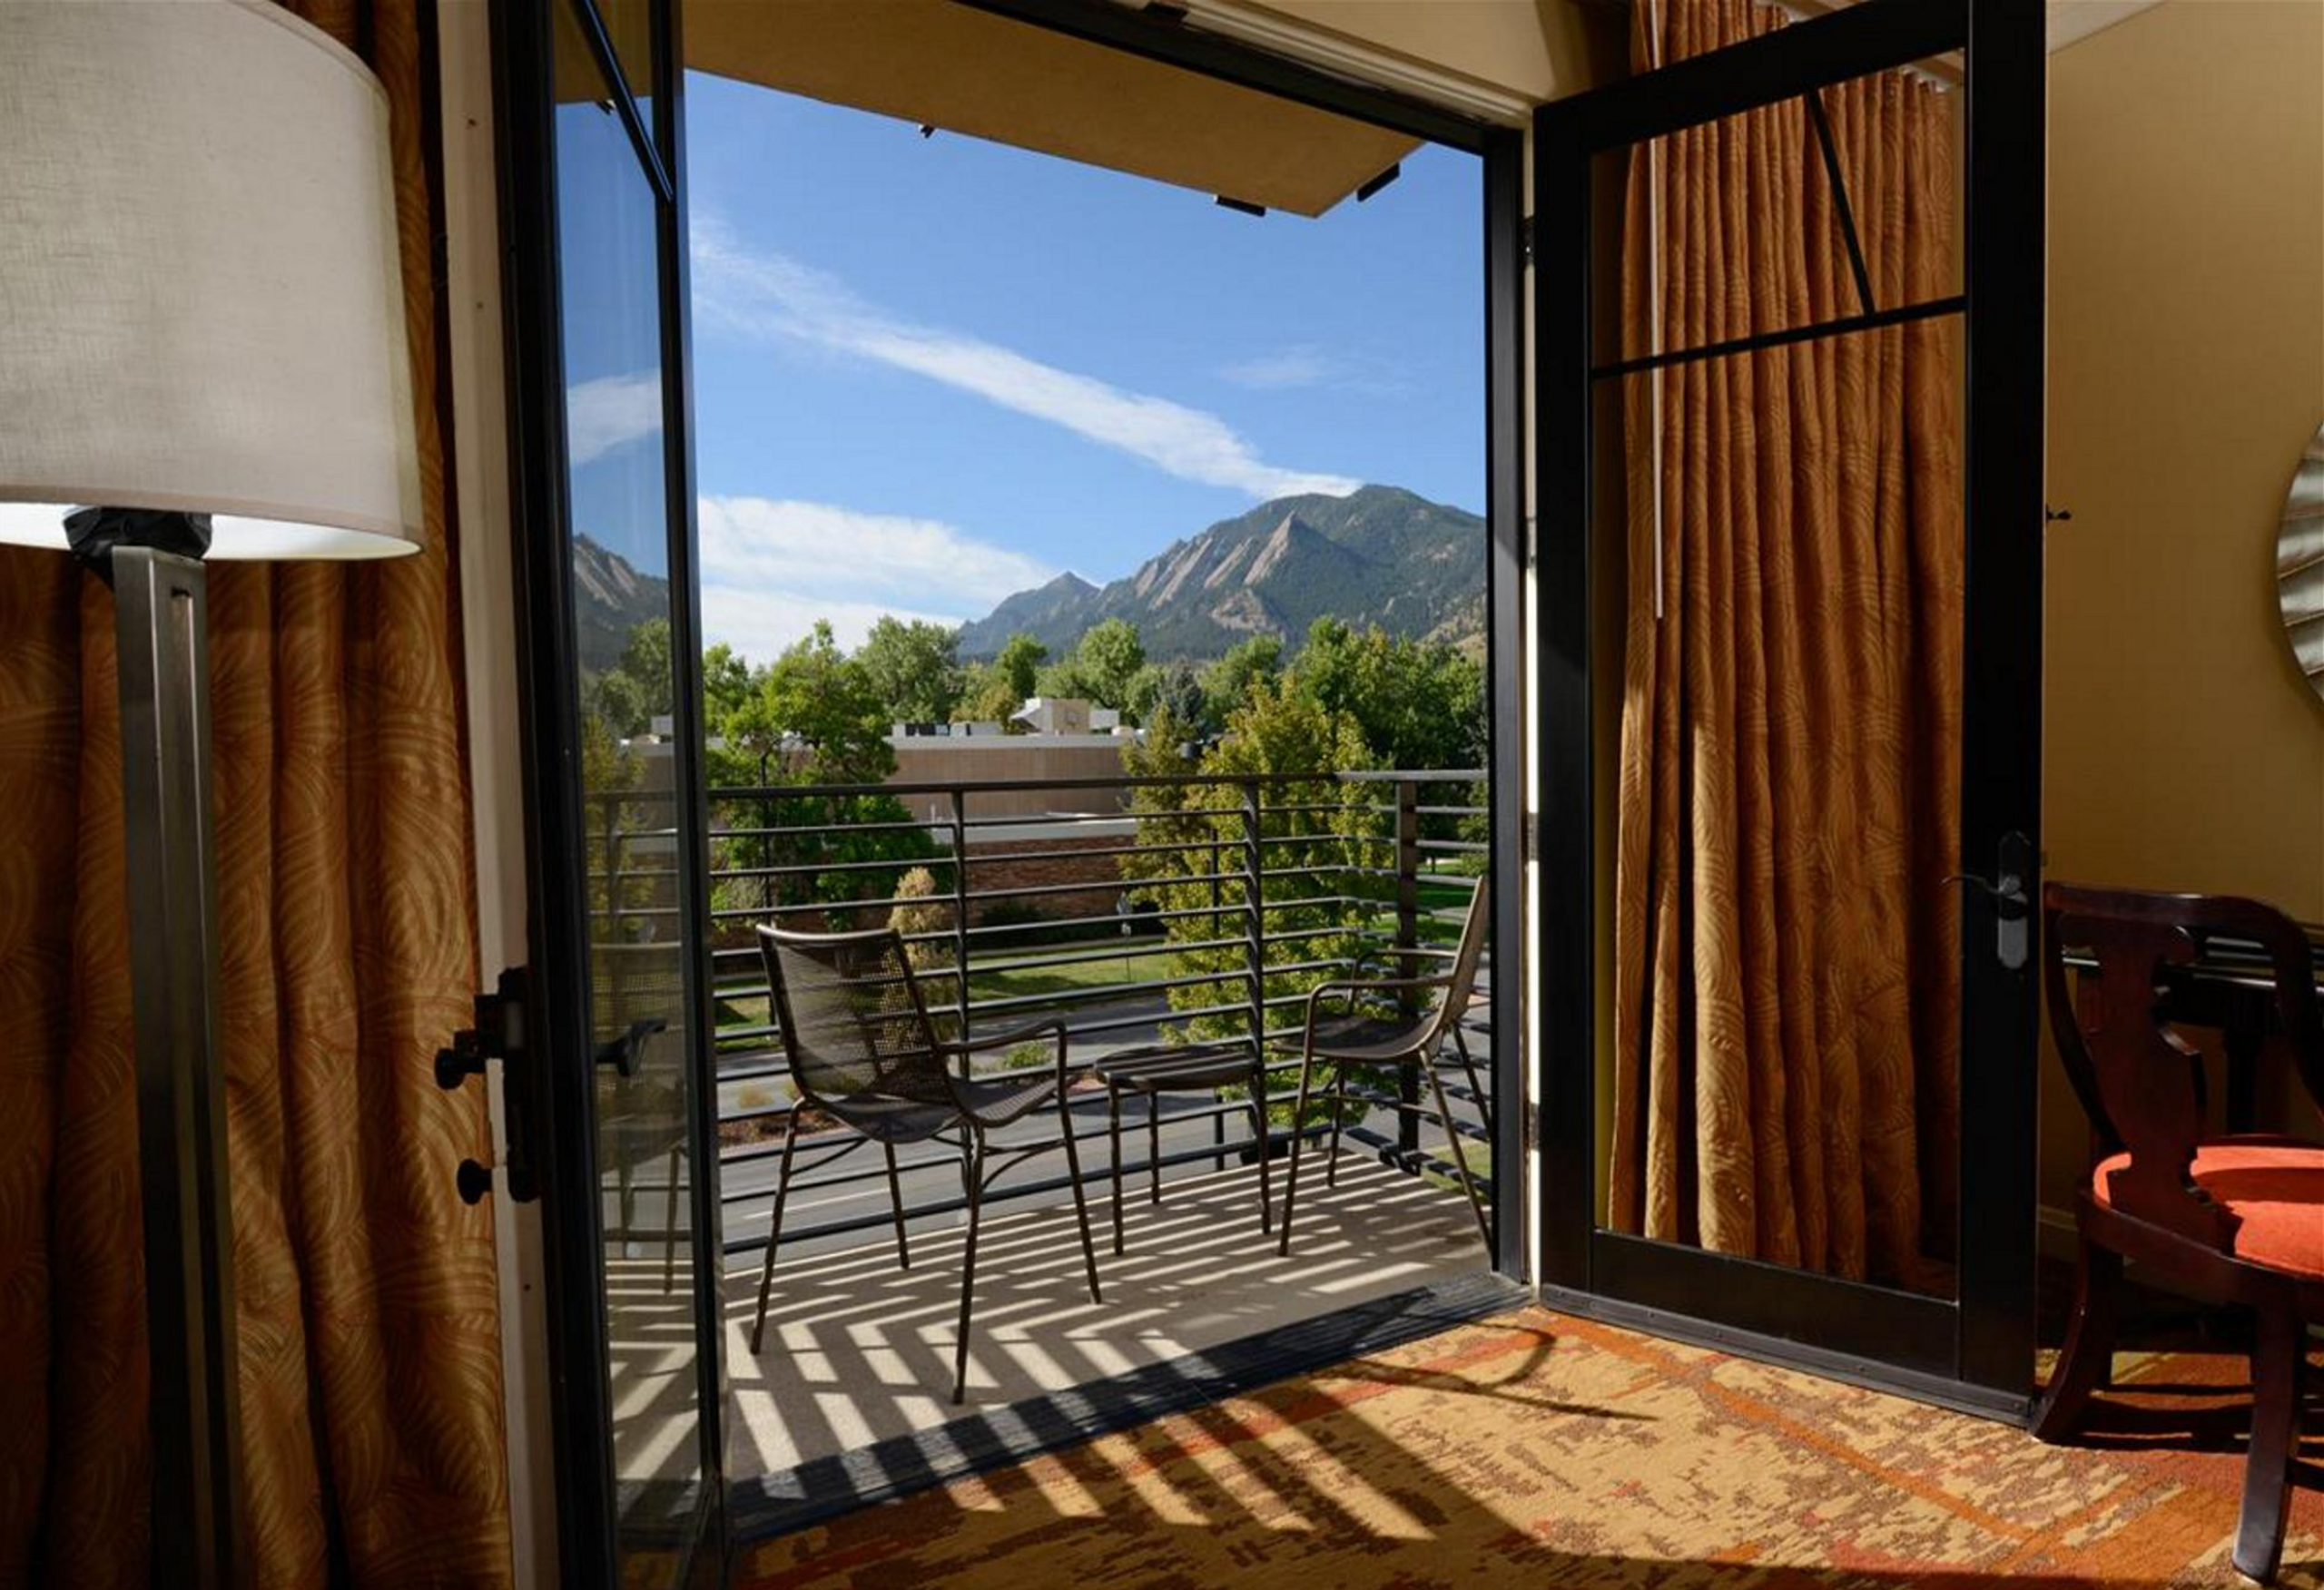 View from inside hotel room looking out to balcony with mountains in background